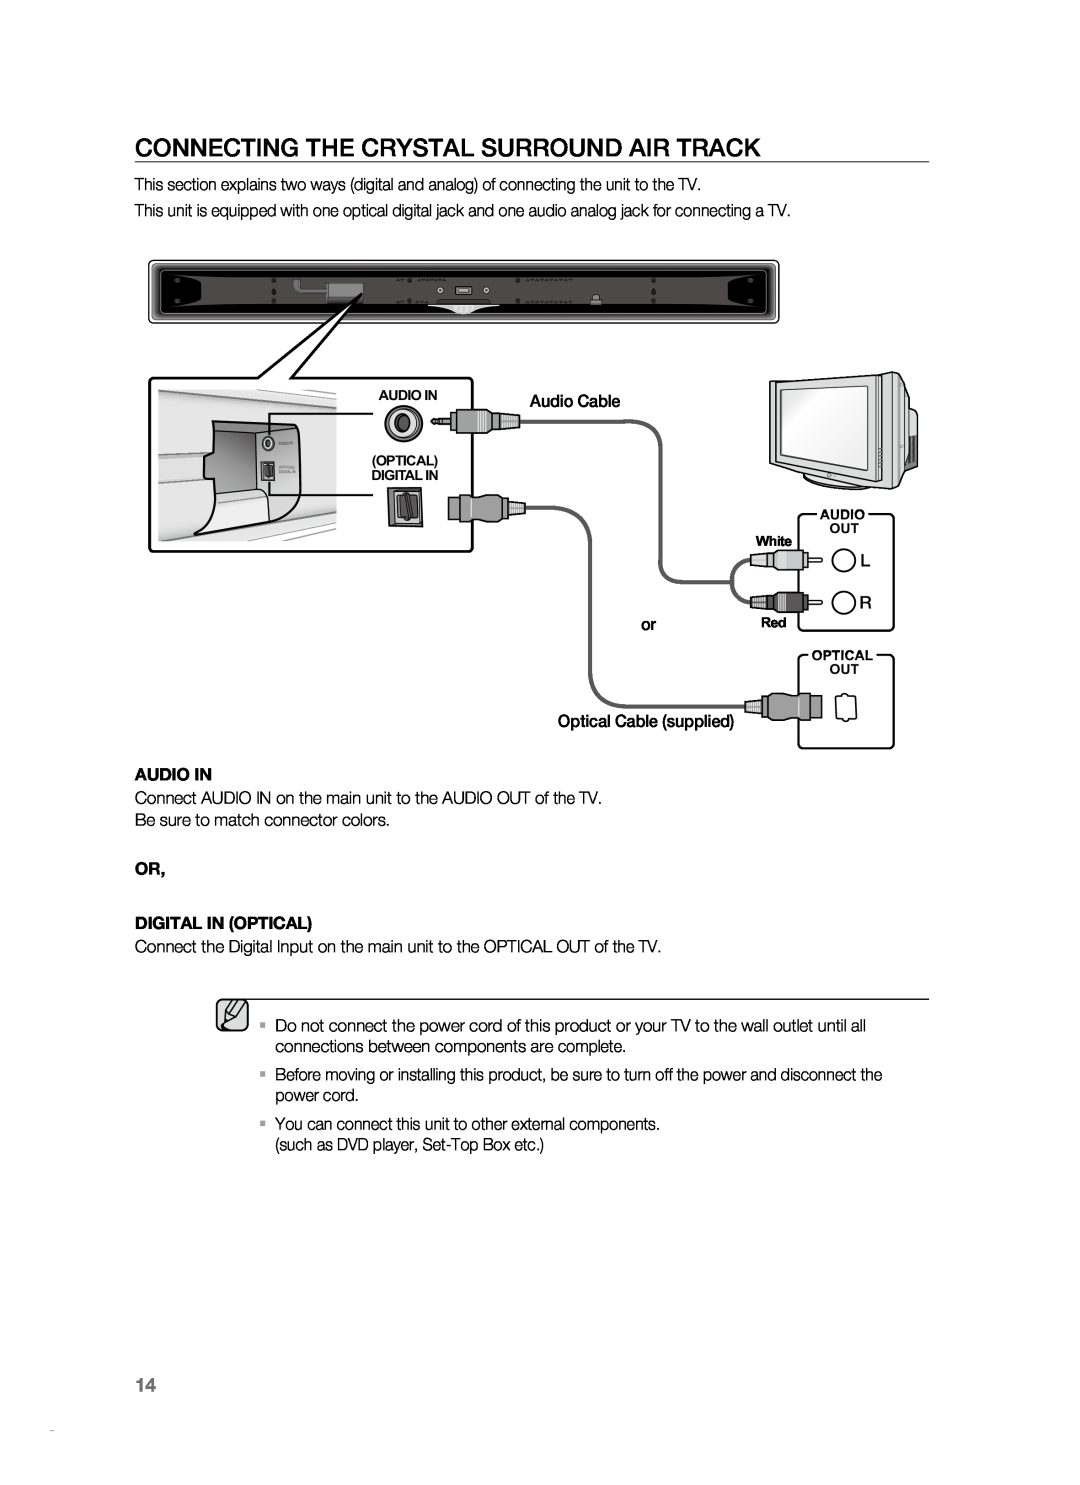 Samsung HT-SB1G, HT-WS1R, HT-SB1R user manual connecting the CRYSTAL SURROUND AIR TRACK, Audio In, Or Digital In Optical 